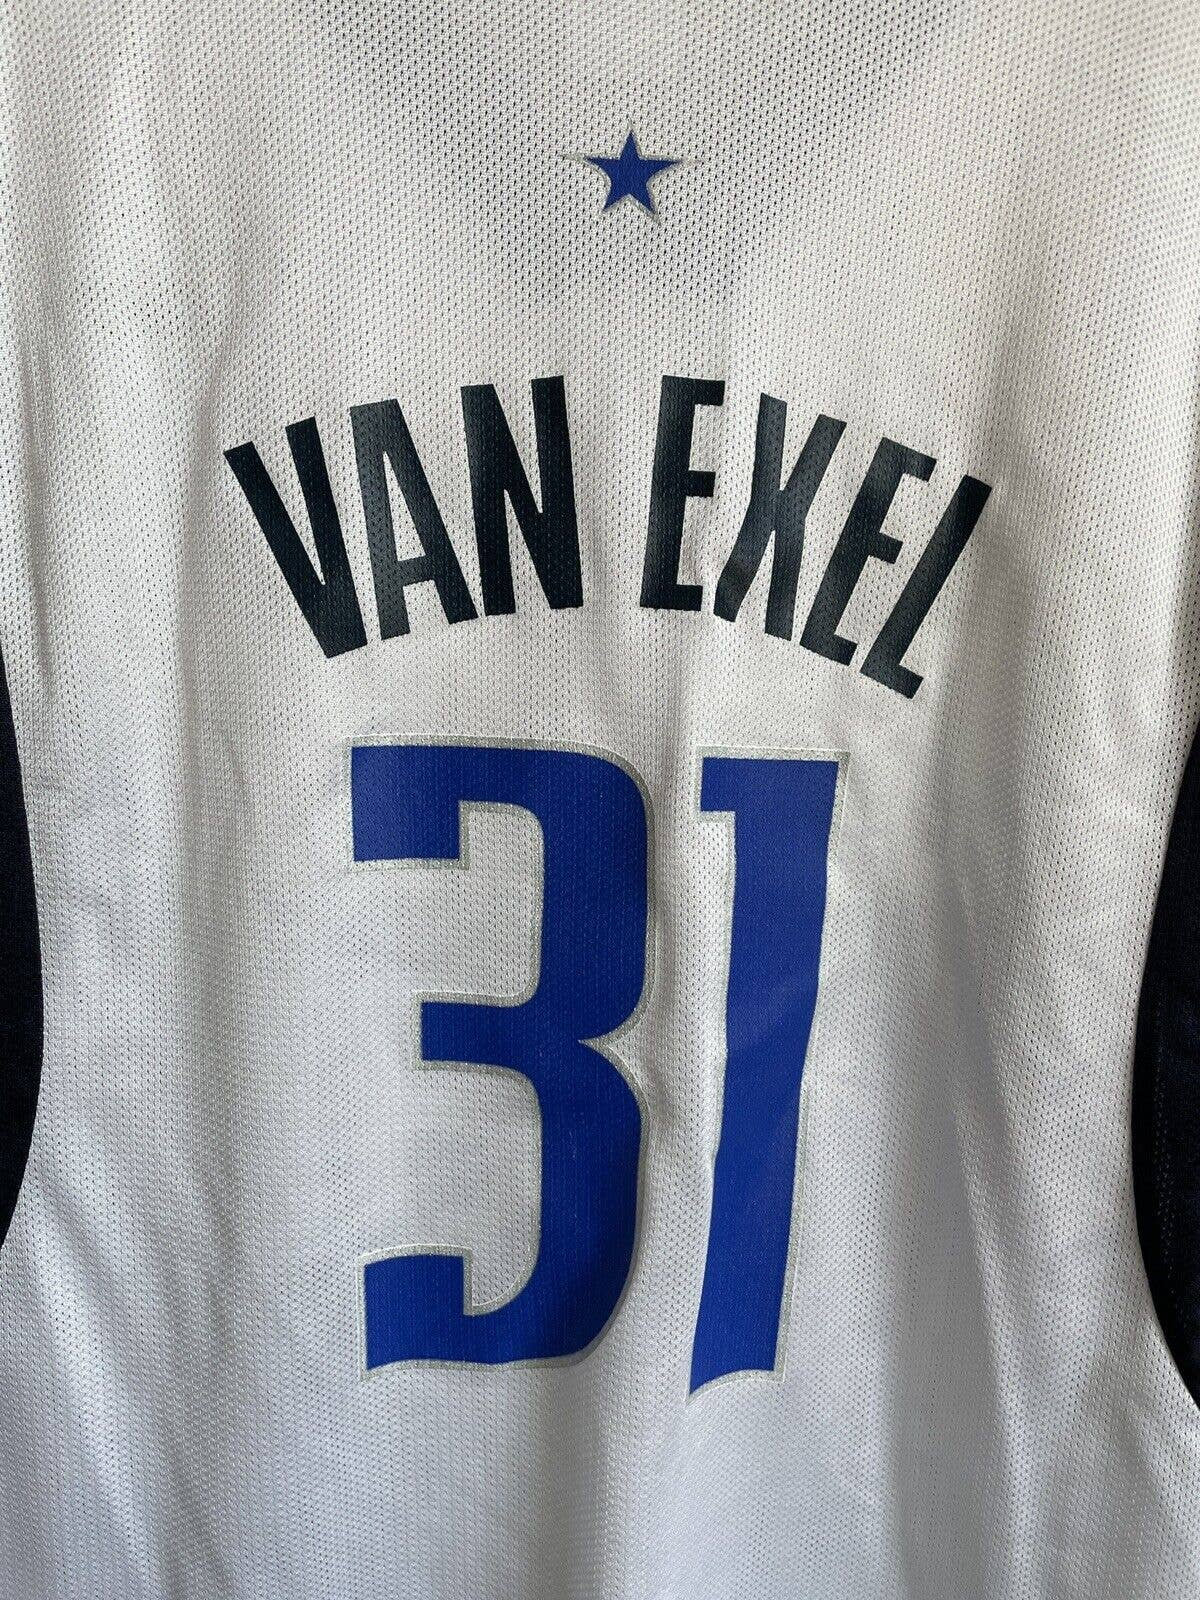 Remembering Nick Van Exel, who was very good - Mavs Moneyball